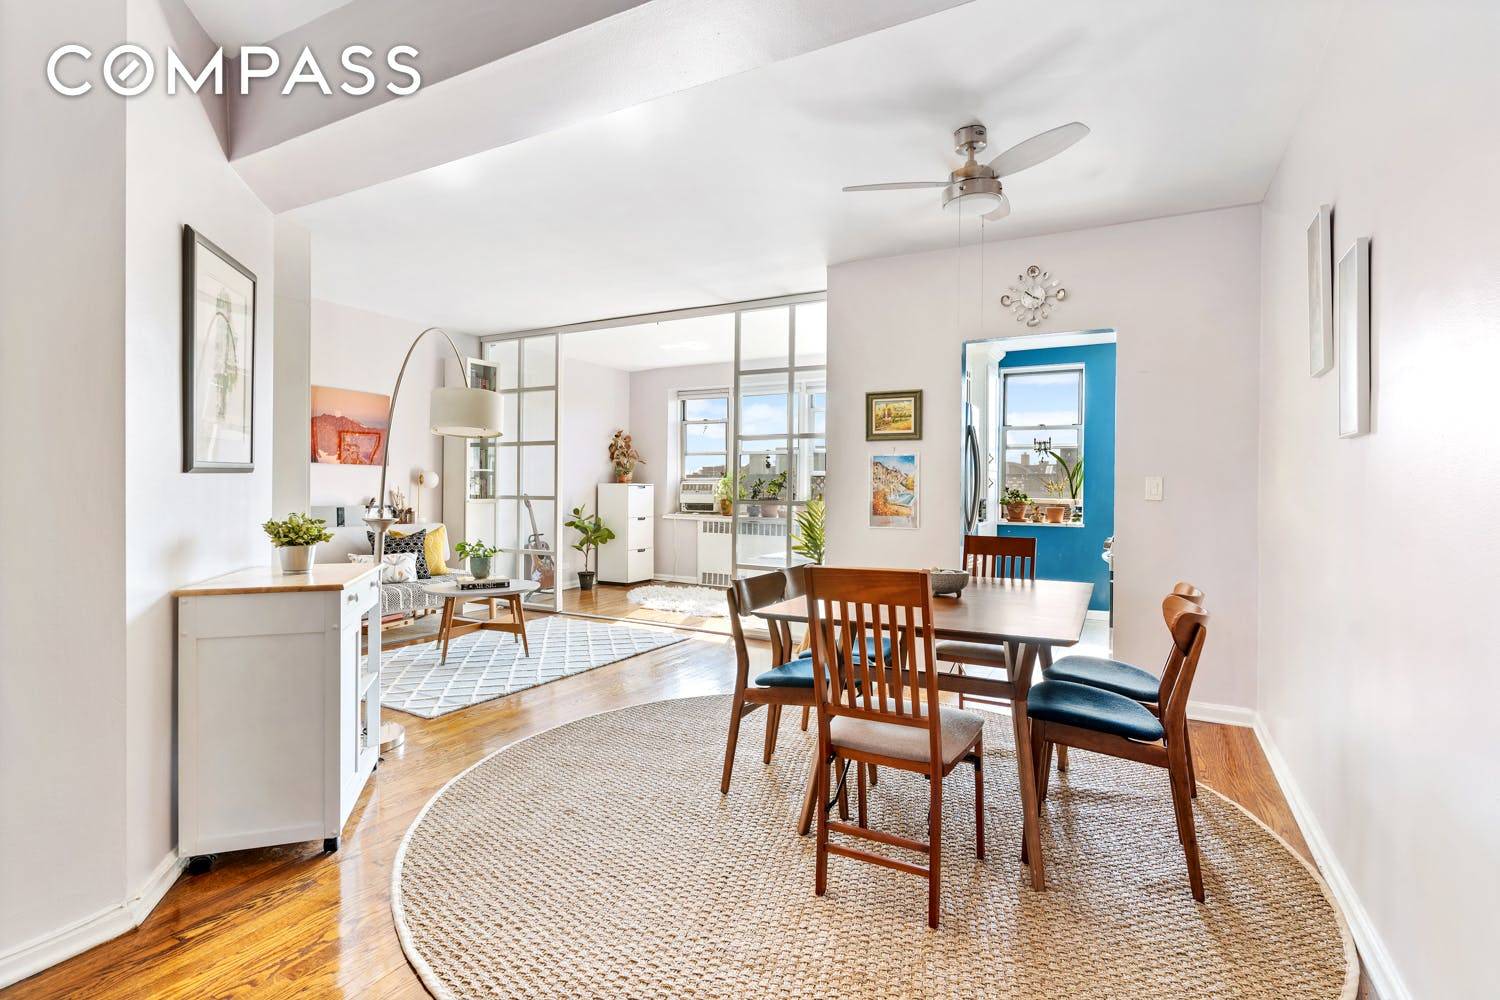 Make your home in lovely Jackson Heights in this beautiful one bedroom, one bathroom featuring abundant natural light, garden views and flexible living space at The Monroe, a stately postwar ...